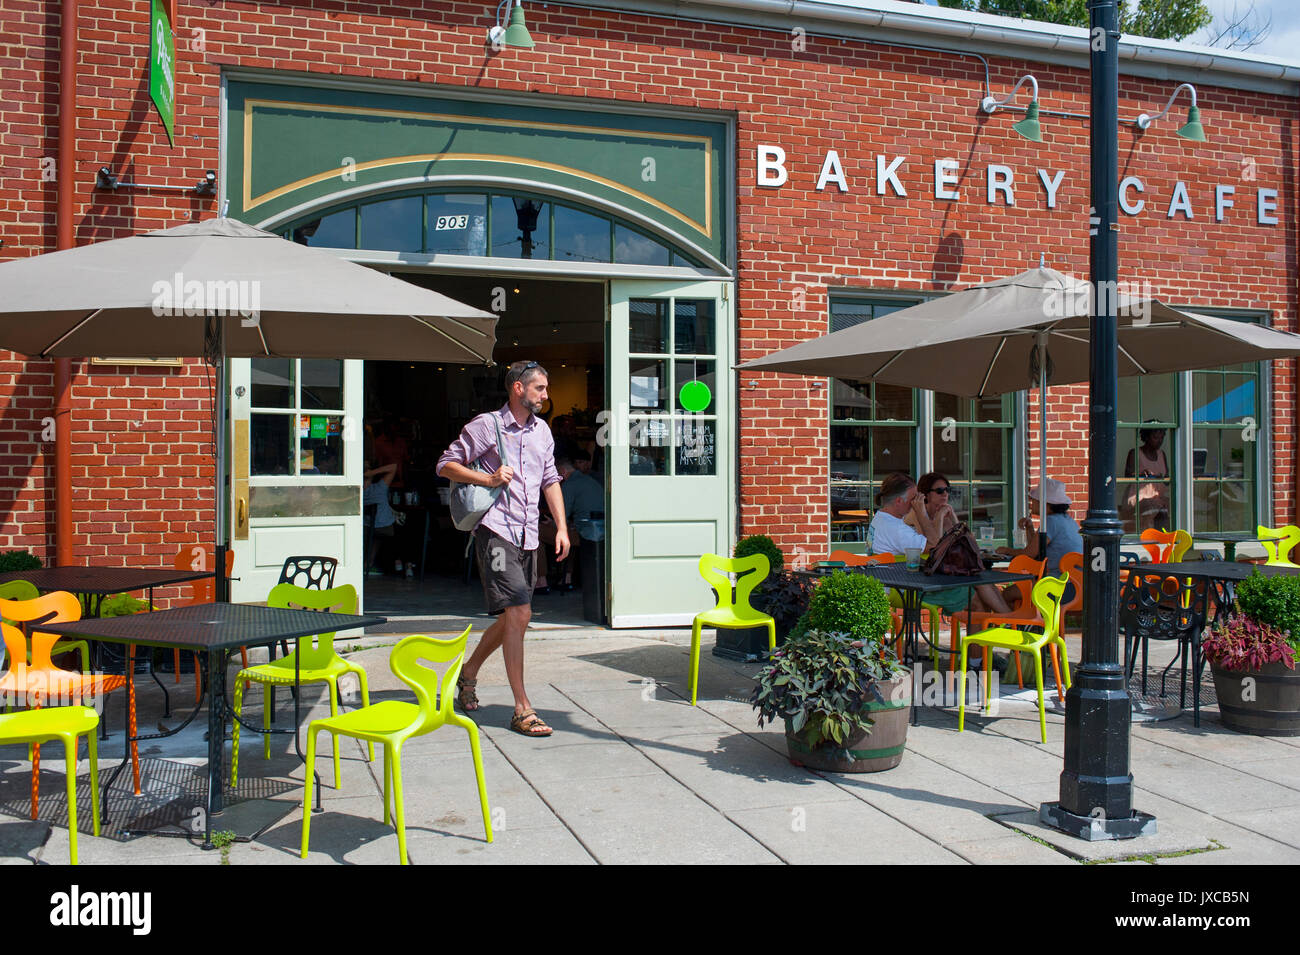 USA Baltimore Fells Point MD Maryland Pitango Bakery Cafe serving coffee and sandwiches outside eating exterior Stock Photo